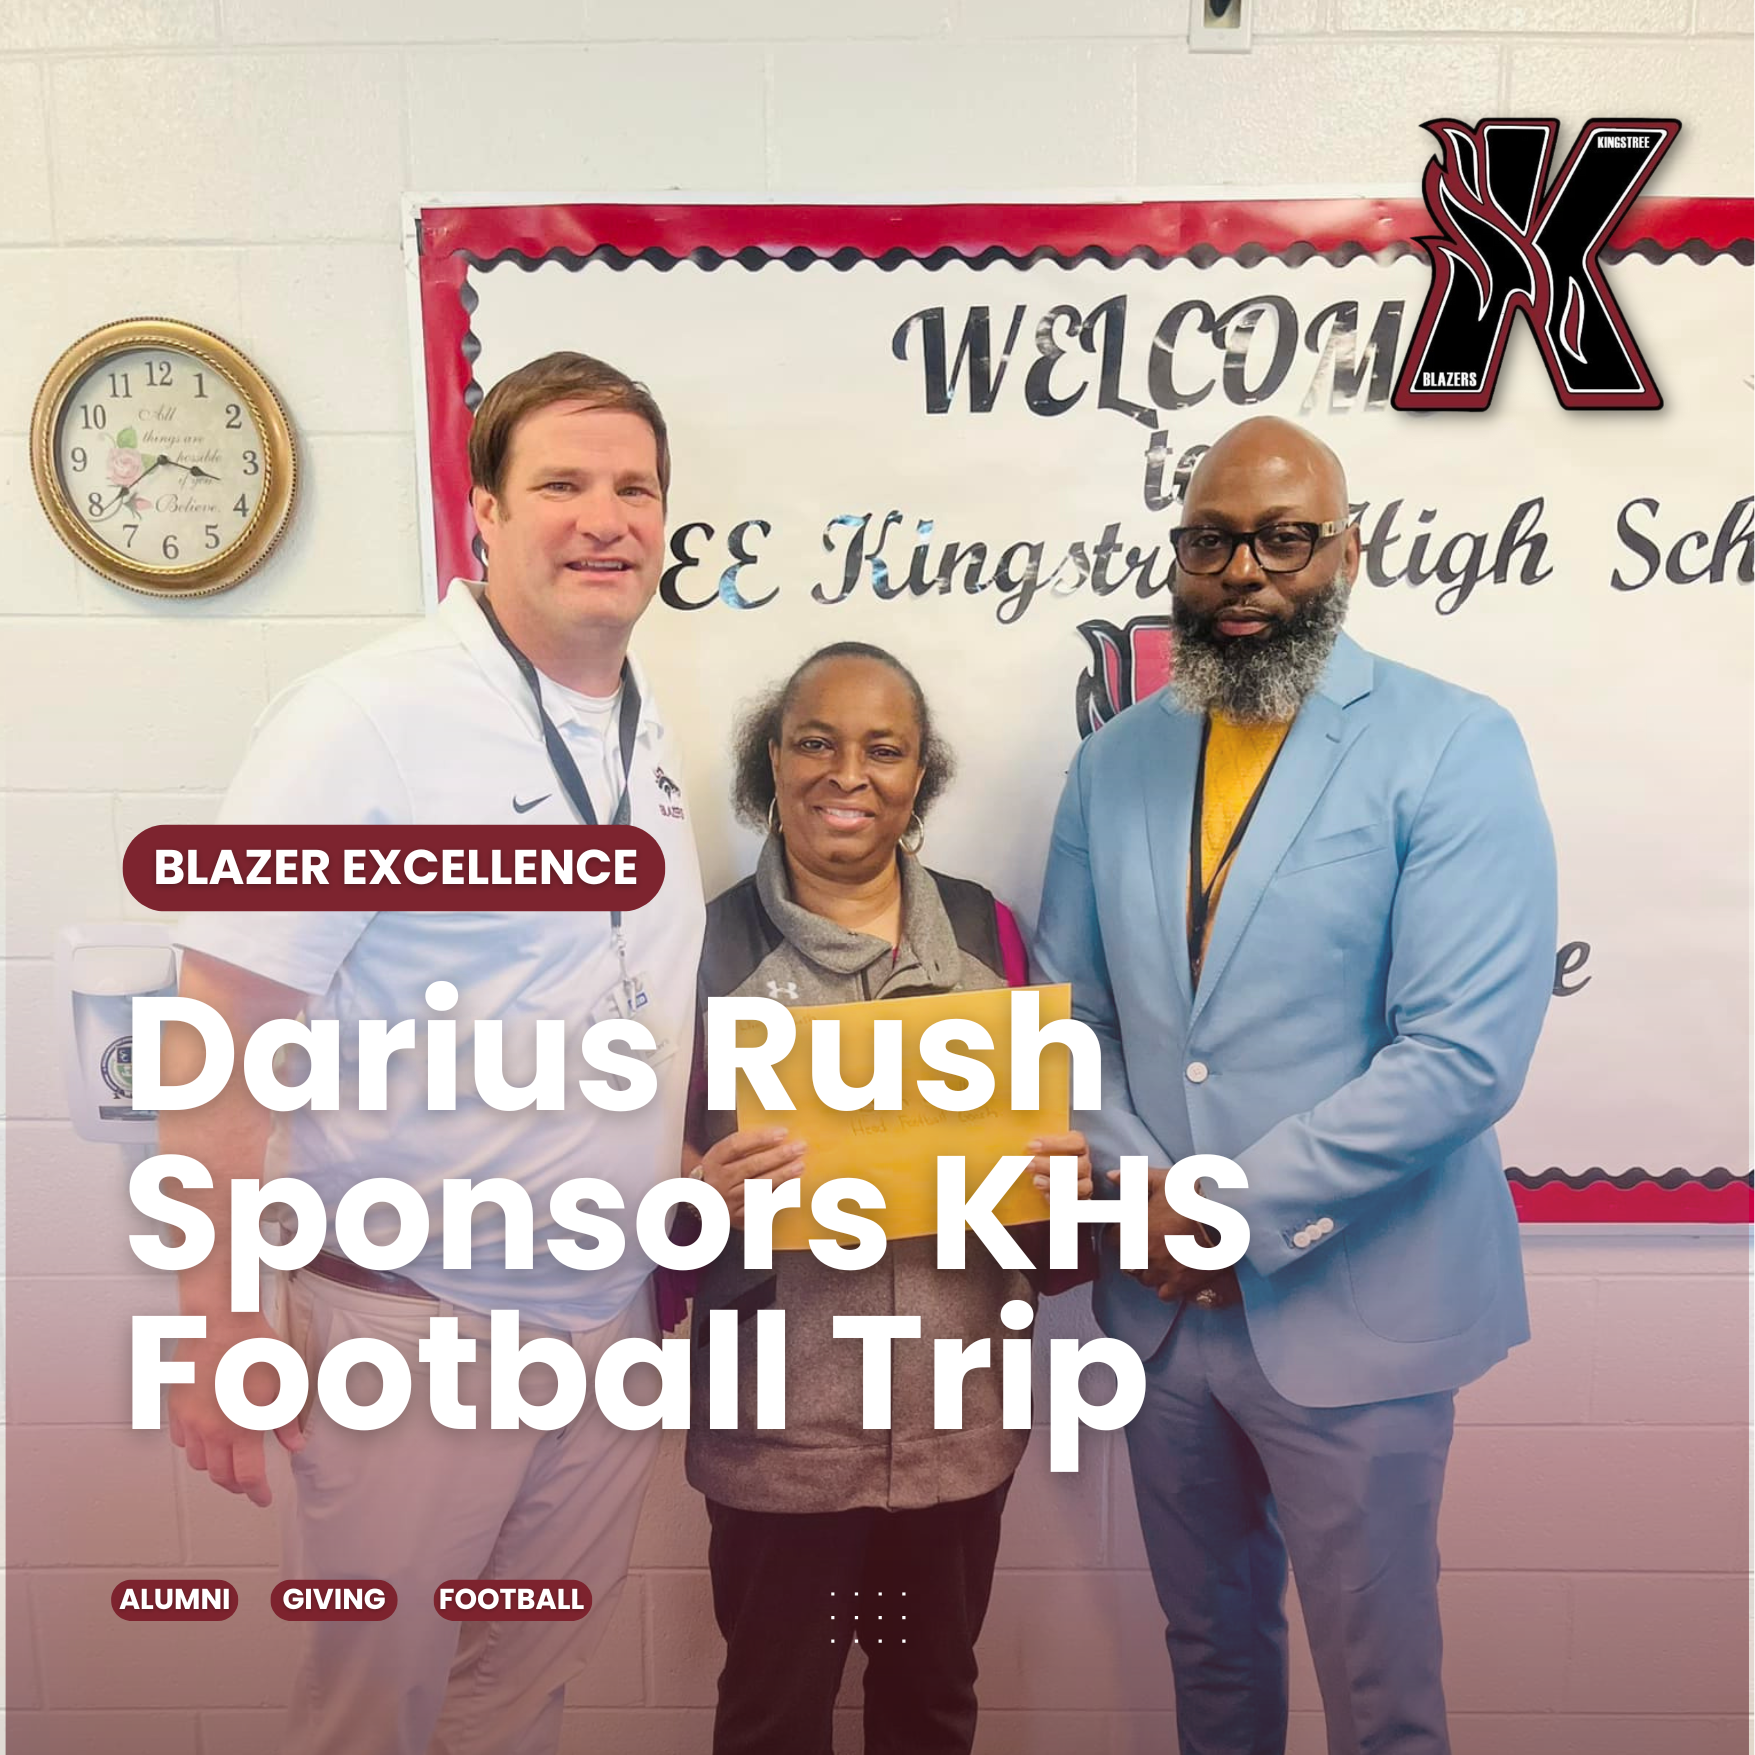 Darius Rush’s mother, Sonya Rush-Harvin is pictured presenting a check to KHS Principal, Mark Fraiser and KHS Football Coach, Brian Smith.